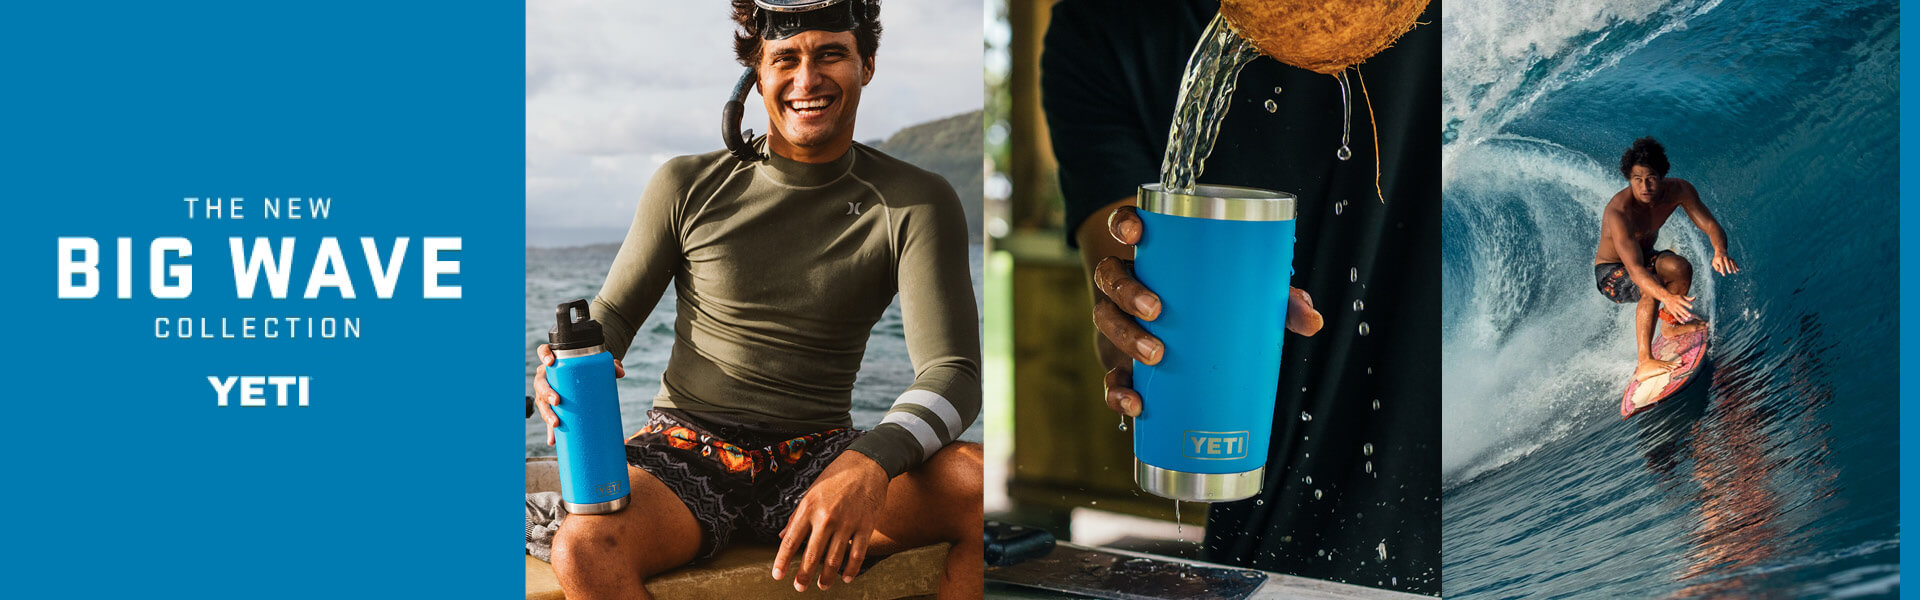 YETI - The King Crab Collection, the new Agave Collection